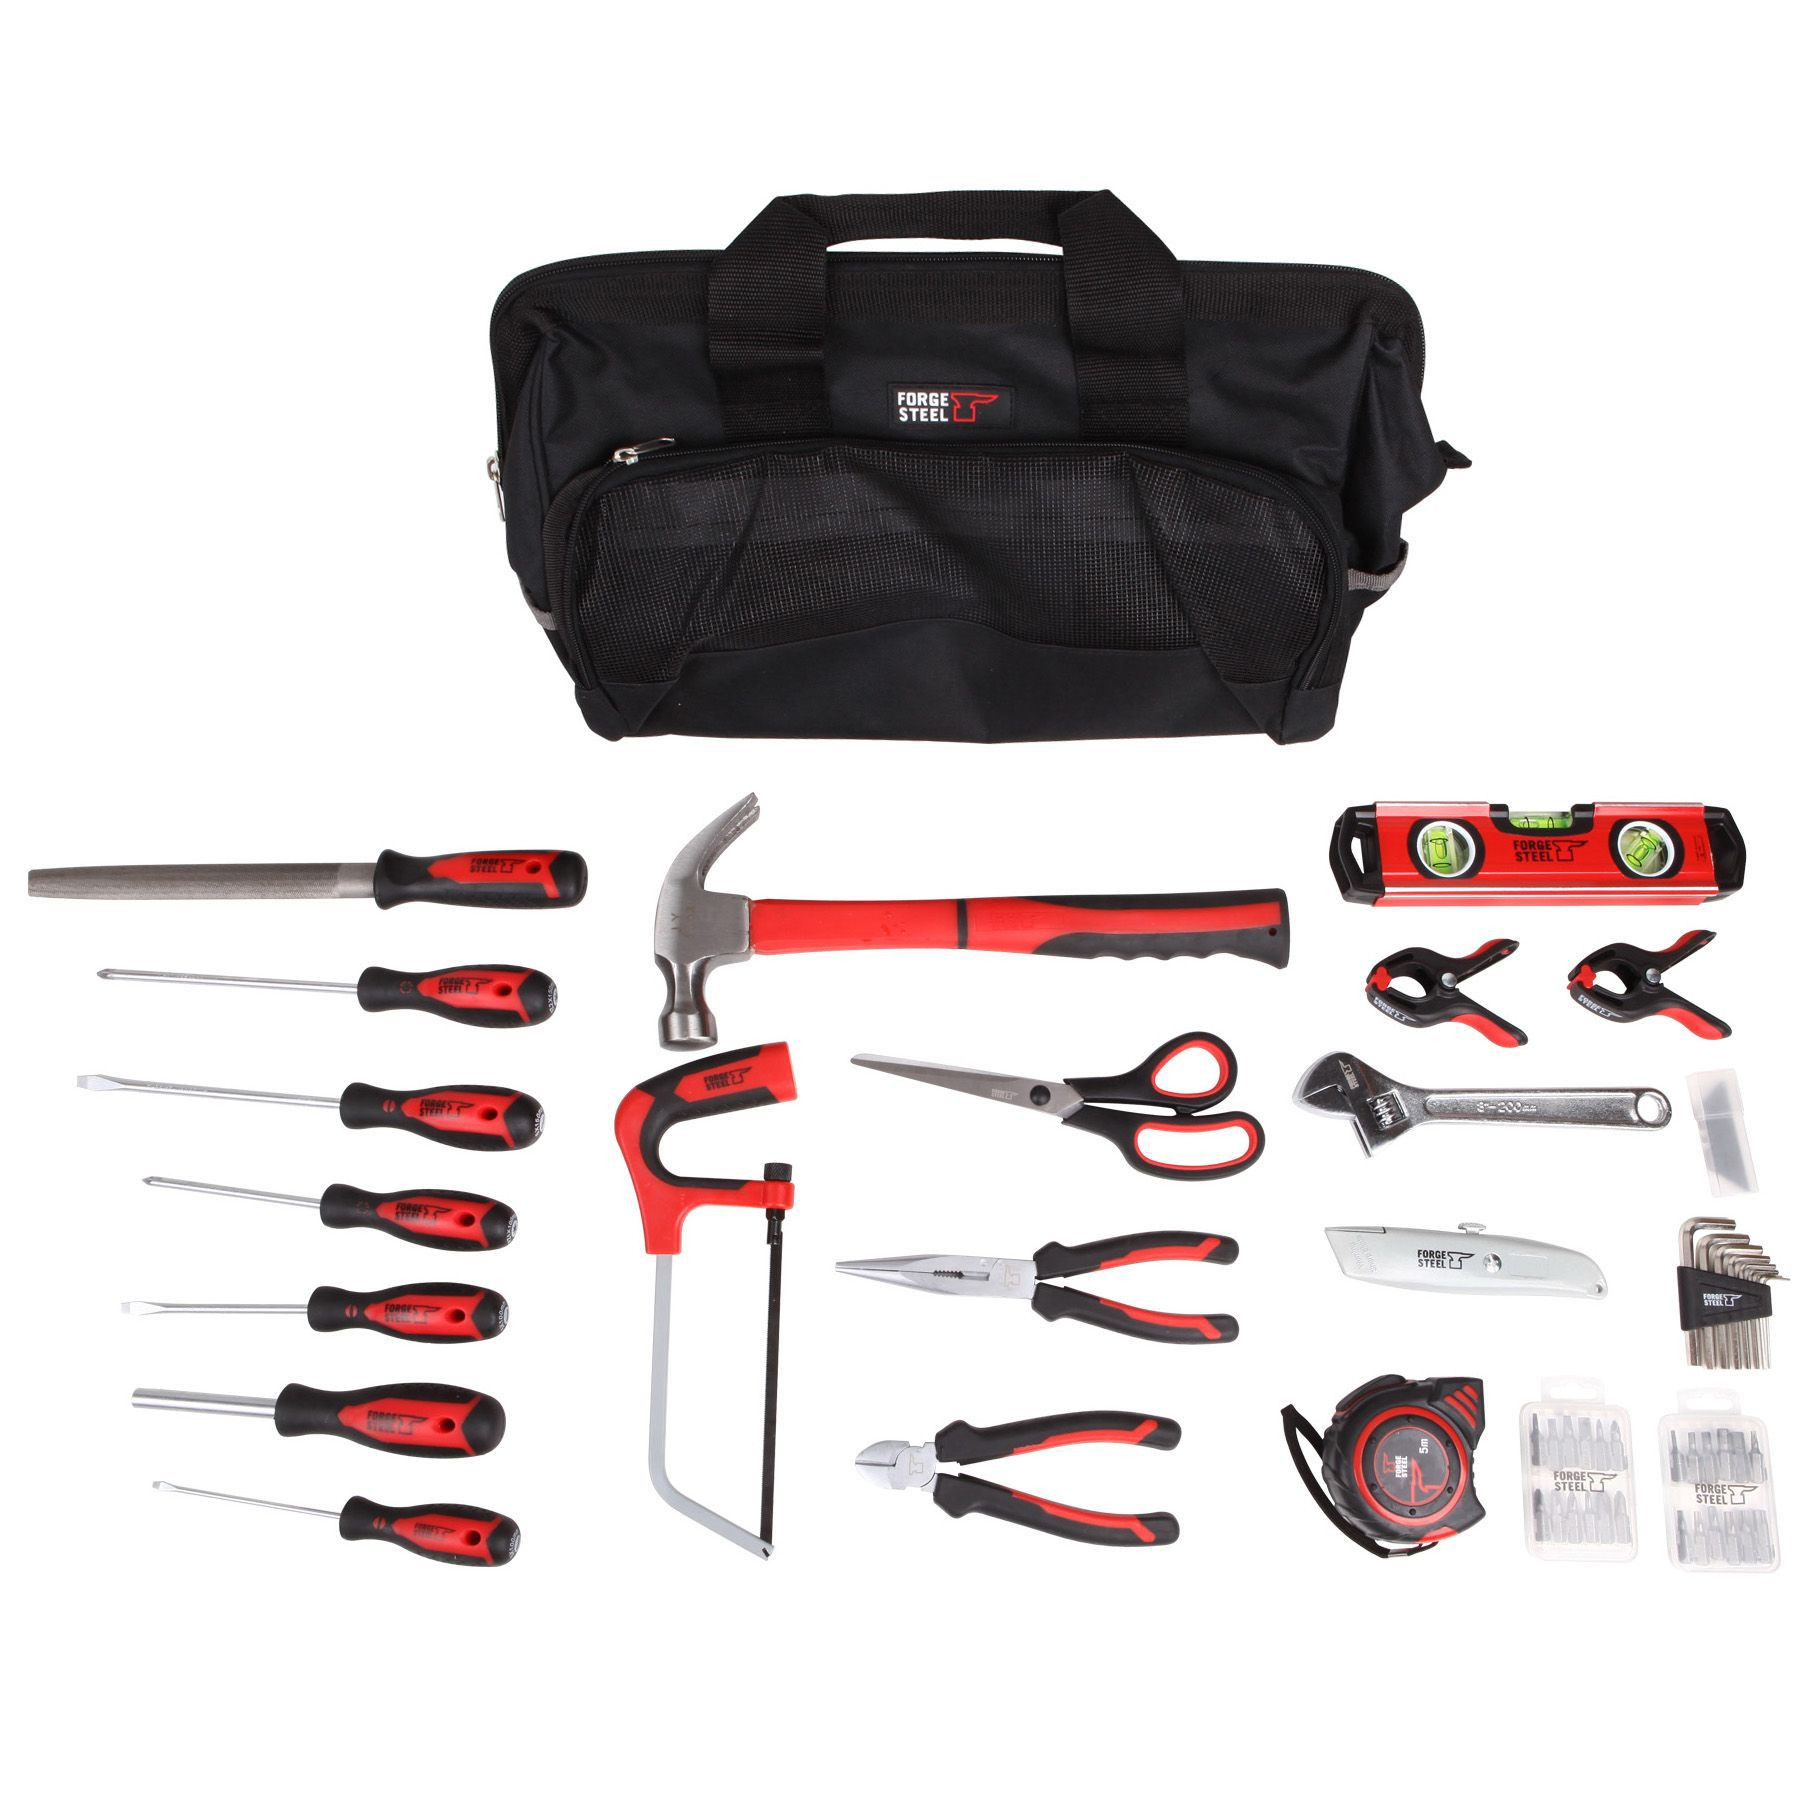 DIY Forge Kit
 Forge Steel 55 Piece Heavy Duty Hand Tool Kit